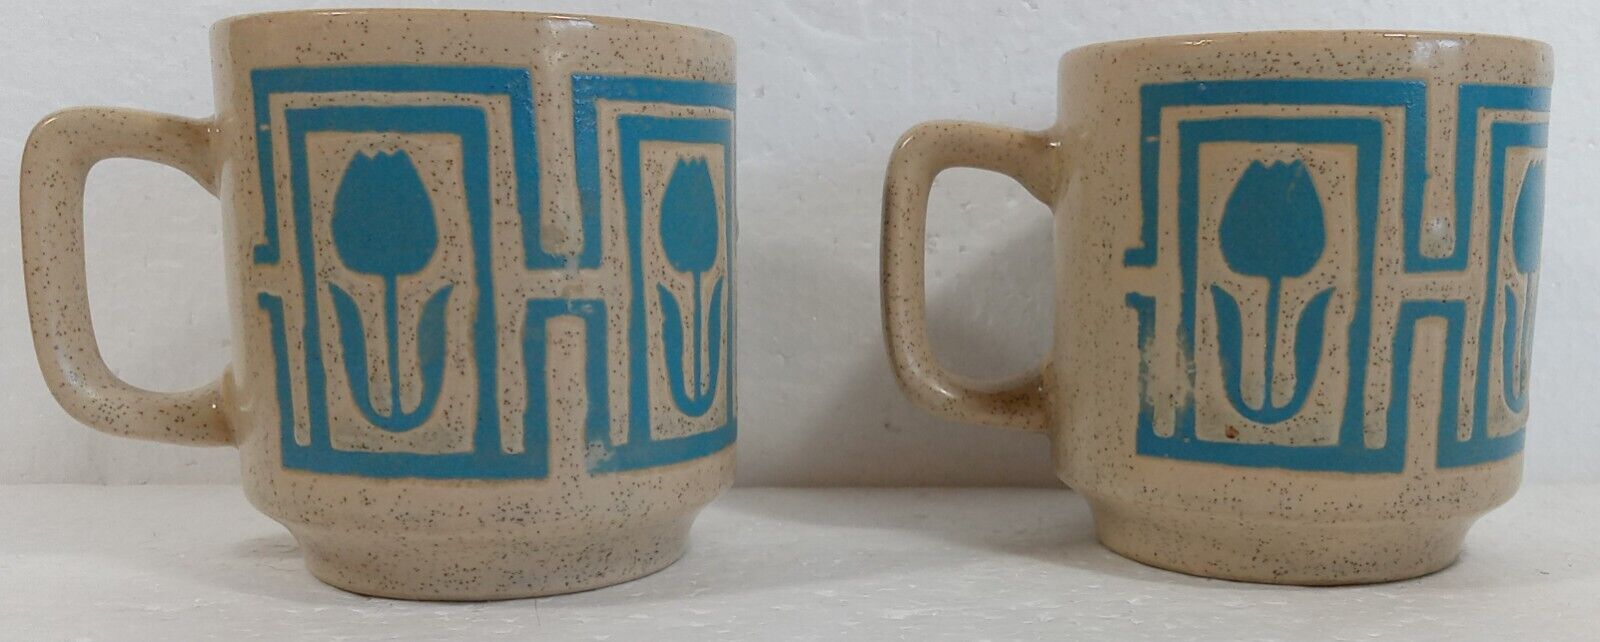 Two Vintage Pottery Coffee Mug Blue Tulips Speckled Has Small Chip 